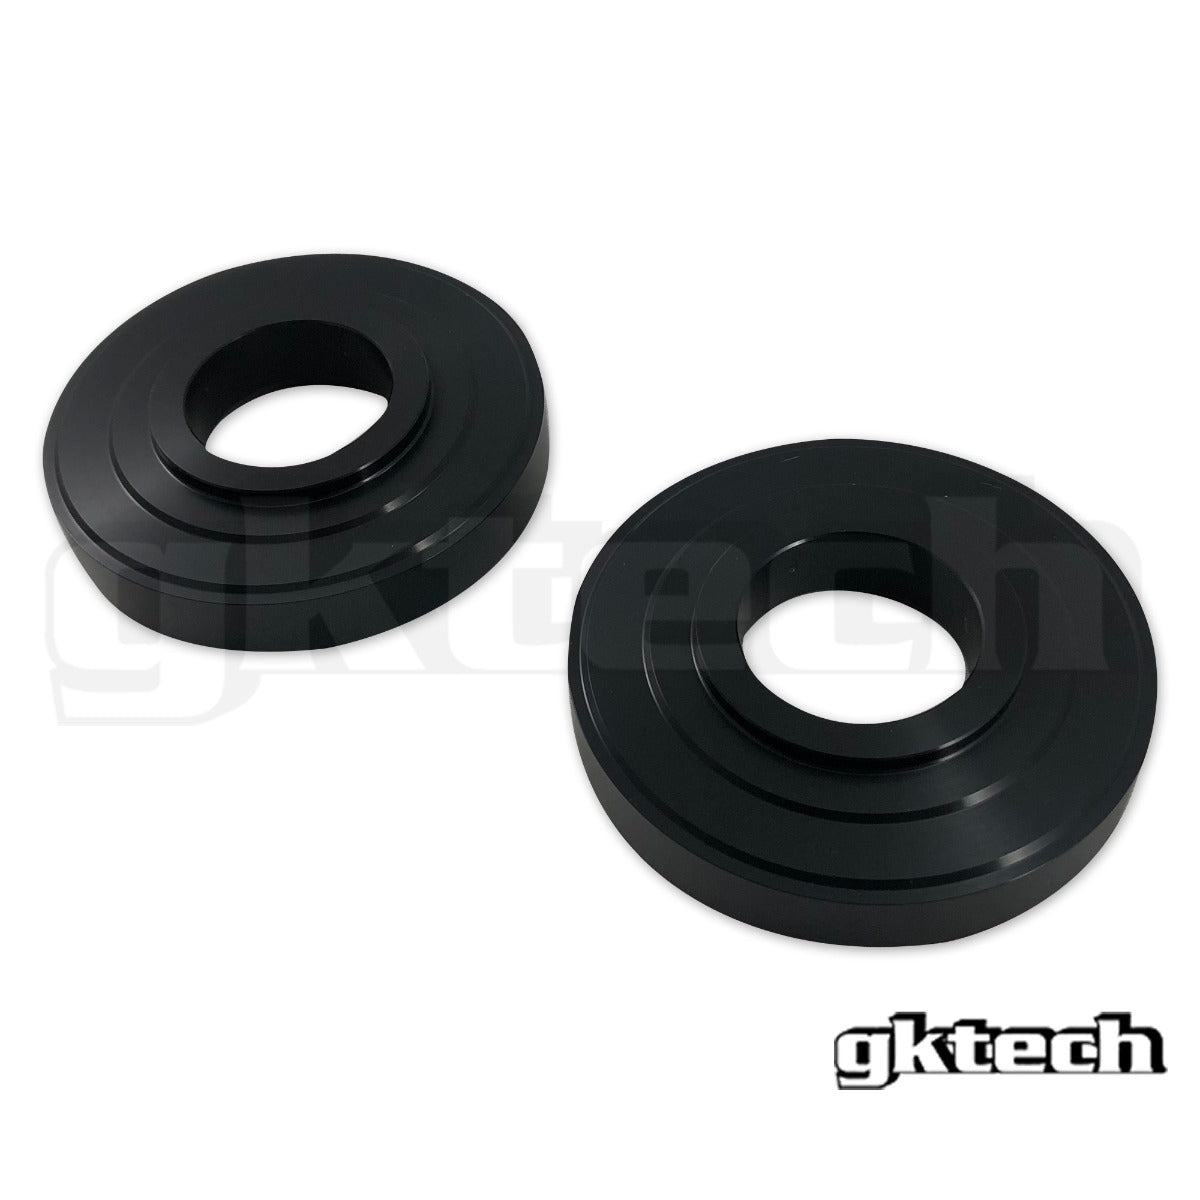 15mm axle spacers